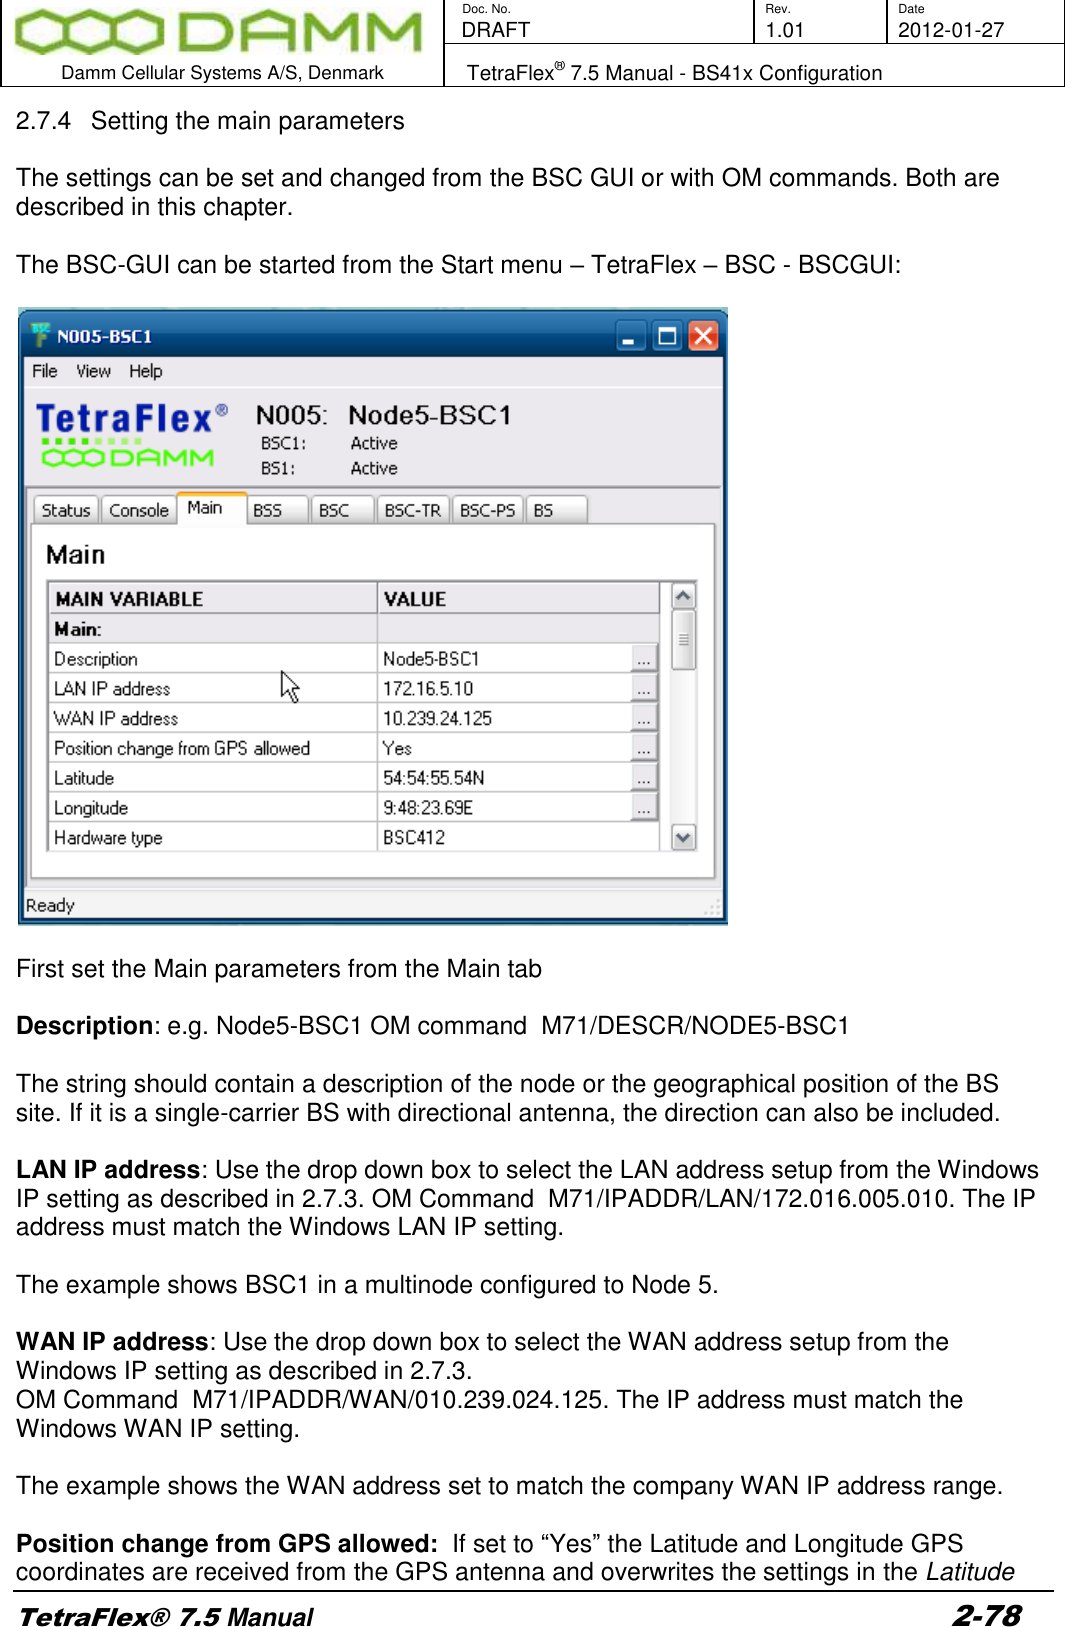        Doc. No. Rev. Date    DRAFT  1.01 2012-01-27  Damm Cellular Systems A/S, Denmark   TetraFlex® 7.5 Manual - BS41x Configuration  TetraFlex® 7.5 Manual 2-78 2.7.4  Setting the main parameters  The settings can be set and changed from the BSC GUI or with OM commands. Both are described in this chapter.   The BSC-GUI can be started from the Start menu – TetraFlex – BSC - BSCGUI:    First set the Main parameters from the Main tab  Description: e.g. Node5-BSC1 OM command  M71/DESCR/NODE5-BSC1  The string should contain a description of the node or the geographical position of the BS site. If it is a single-carrier BS with directional antenna, the direction can also be included.   LAN IP address: Use the drop down box to select the LAN address setup from the Windows IP setting as described in 2.7.3. OM Command  M71/IPADDR/LAN/172.016.005.010. The IP address must match the Windows LAN IP setting.  The example shows BSC1 in a multinode configured to Node 5.  WAN IP address: Use the drop down box to select the WAN address setup from the Windows IP setting as described in 2.7.3.  OM Command  M71/IPADDR/WAN/010.239.024.125. The IP address must match the Windows WAN IP setting.  The example shows the WAN address set to match the company WAN IP address range.  Position change from GPS allowed:  If set to “Yes” the Latitude and Longitude GPS coordinates are received from the GPS antenna and overwrites the settings in the Latitude 